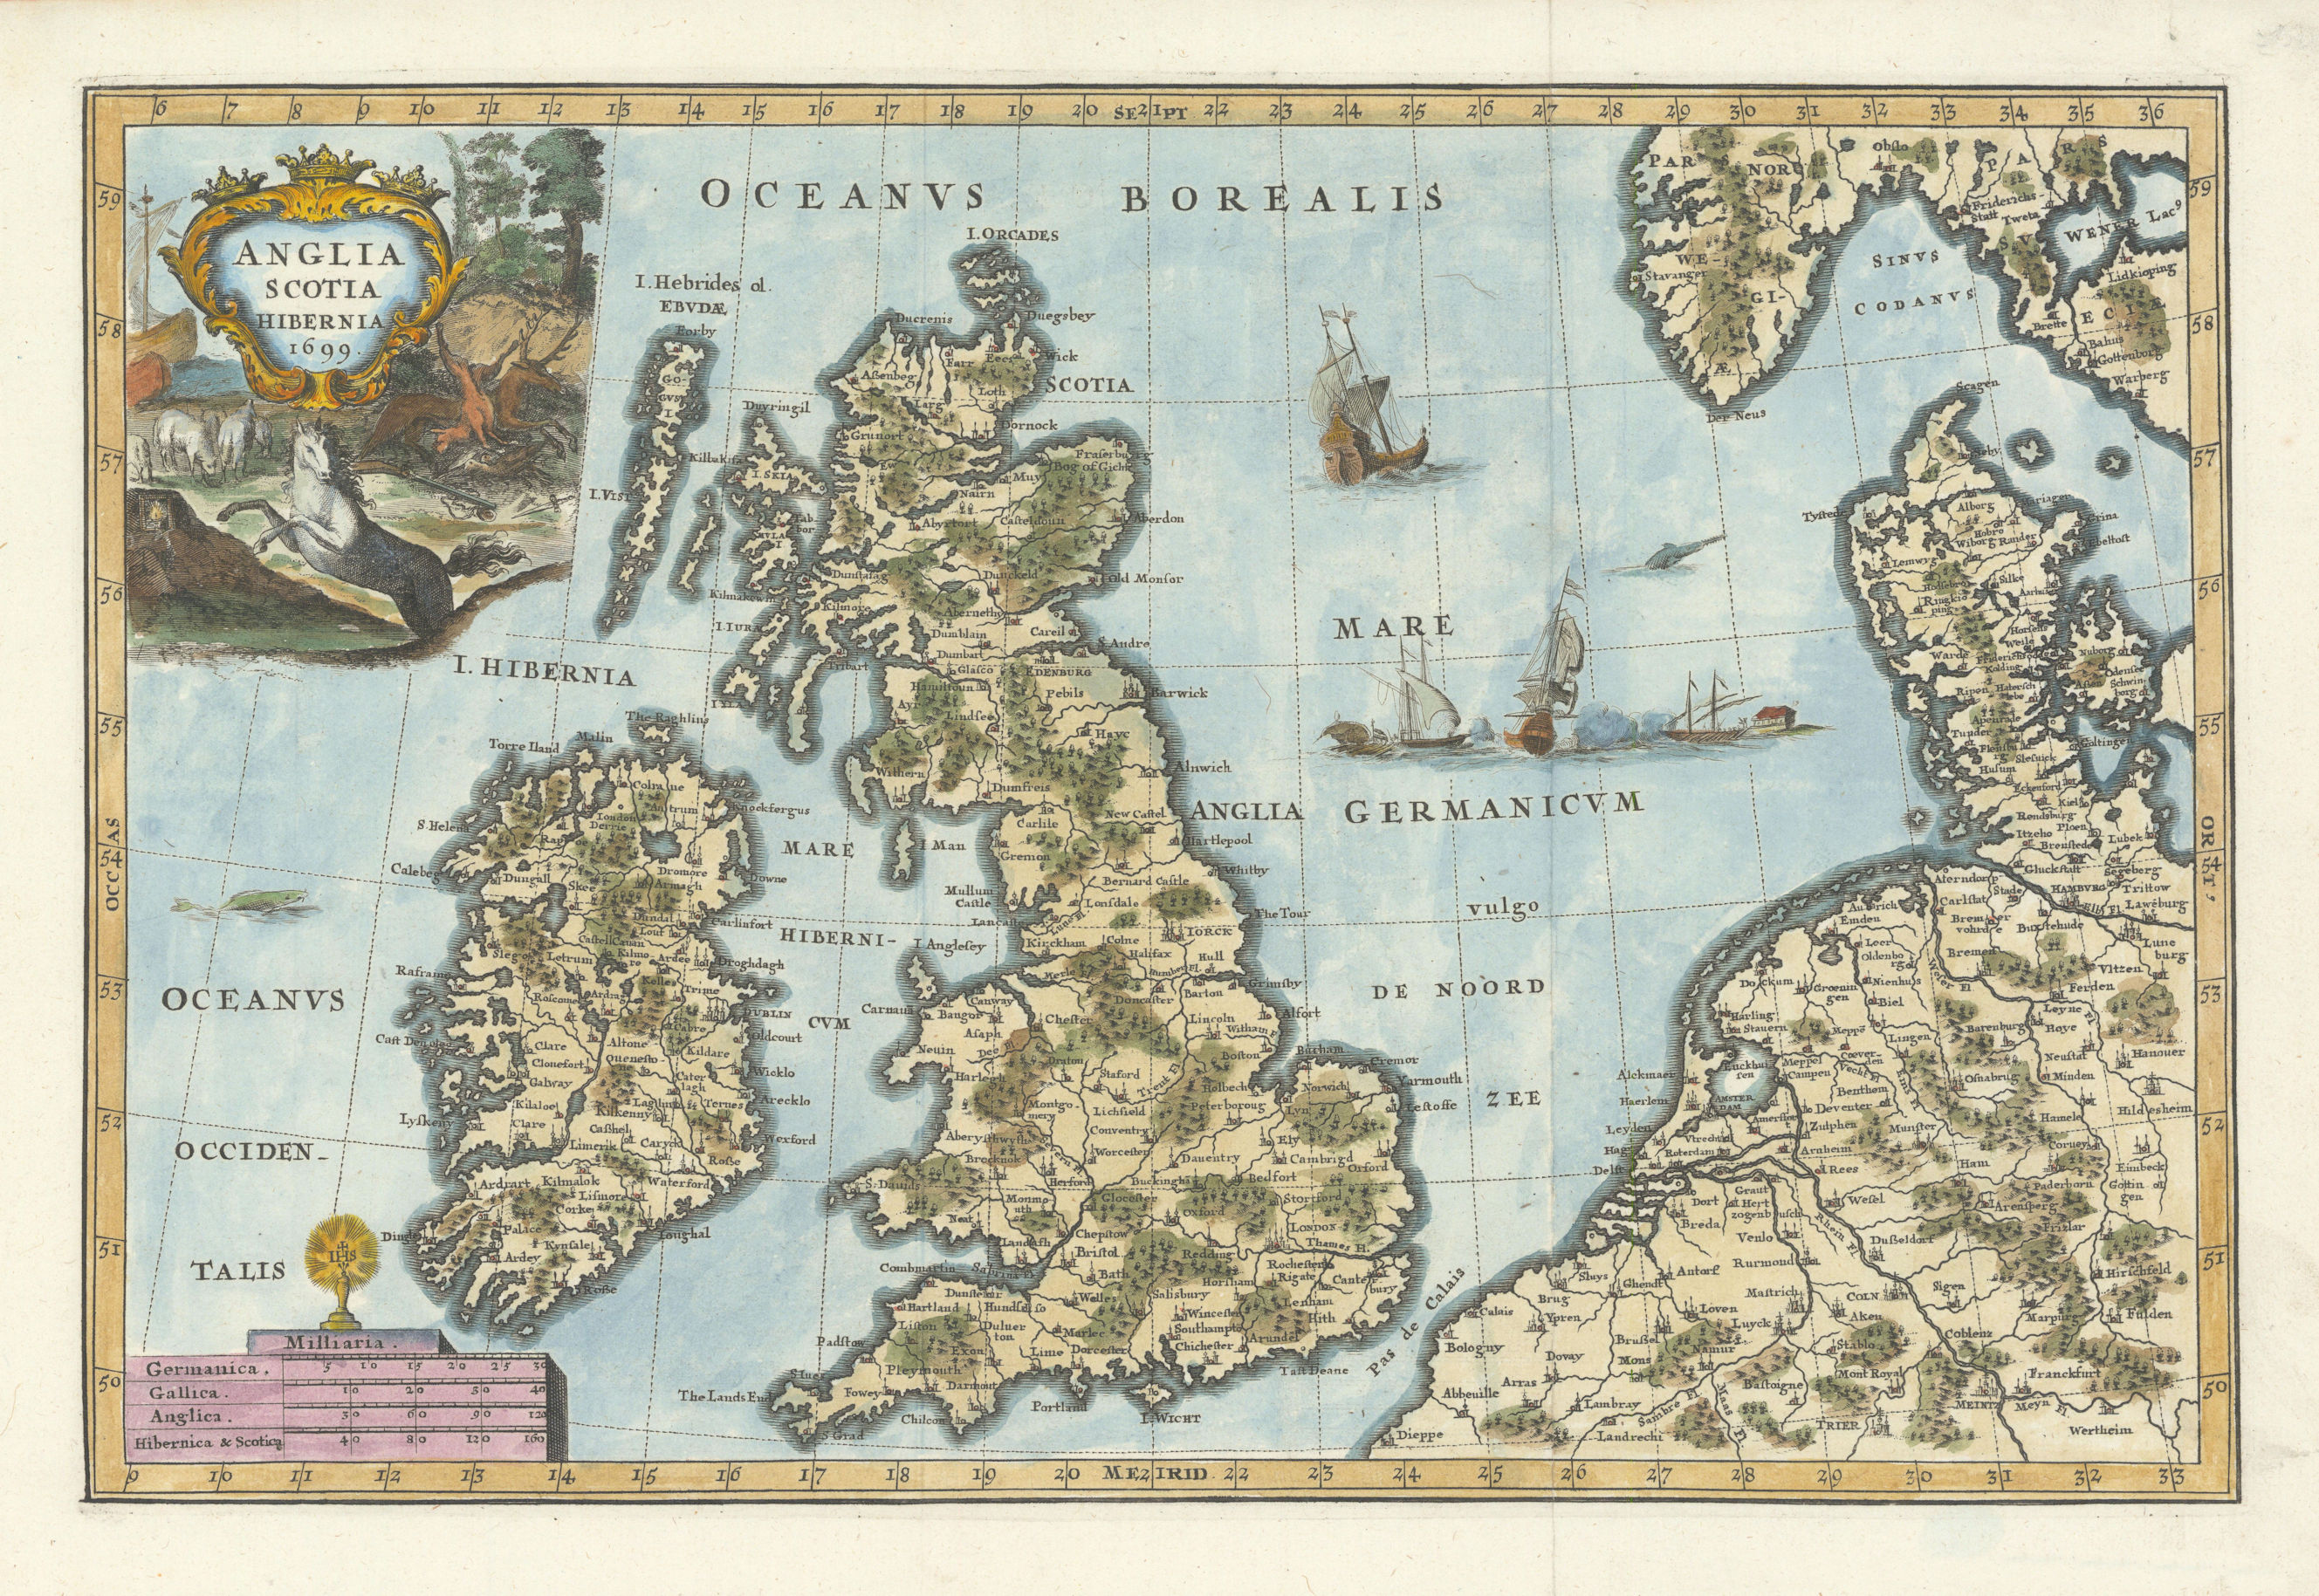 Associate Product Anglia Scotia Hibernia 1699 by Heinrich Scherer. British Isles 1703 old map